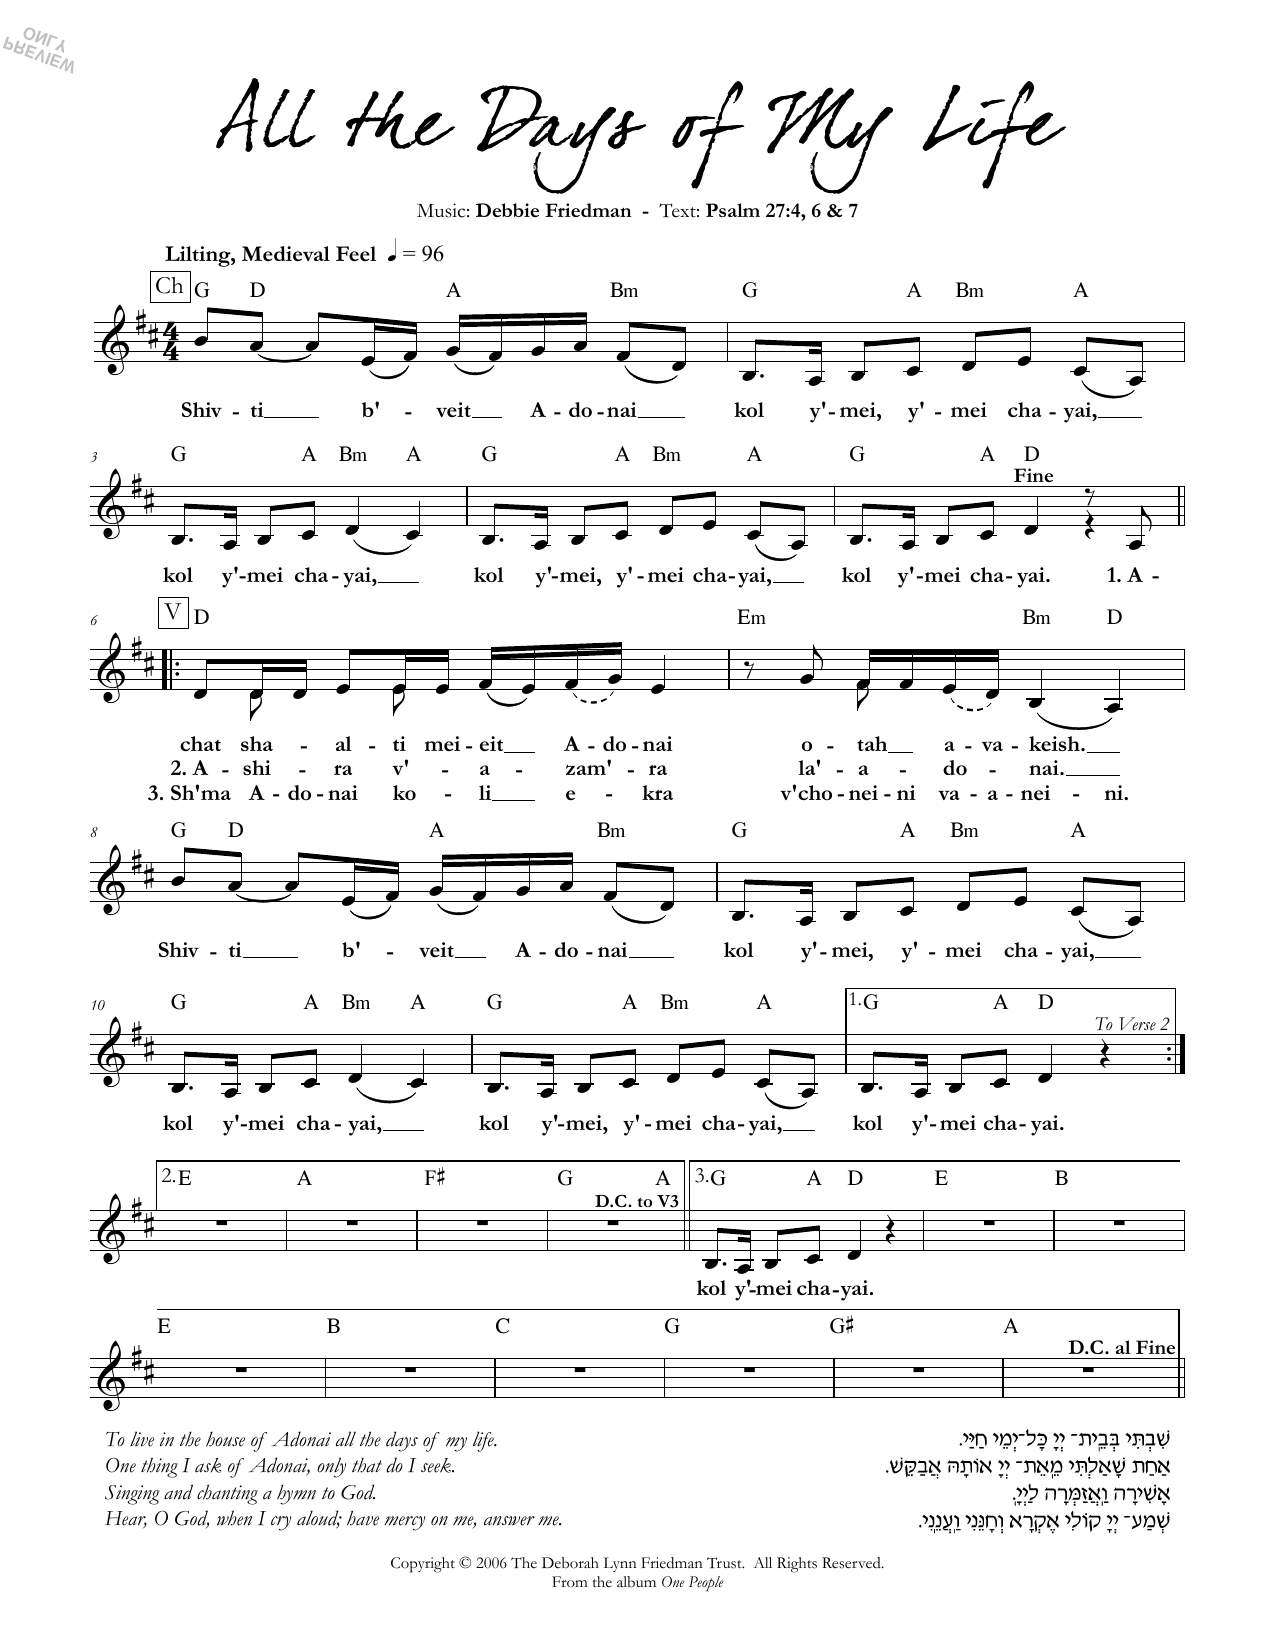 All the Days of My Life sheet music